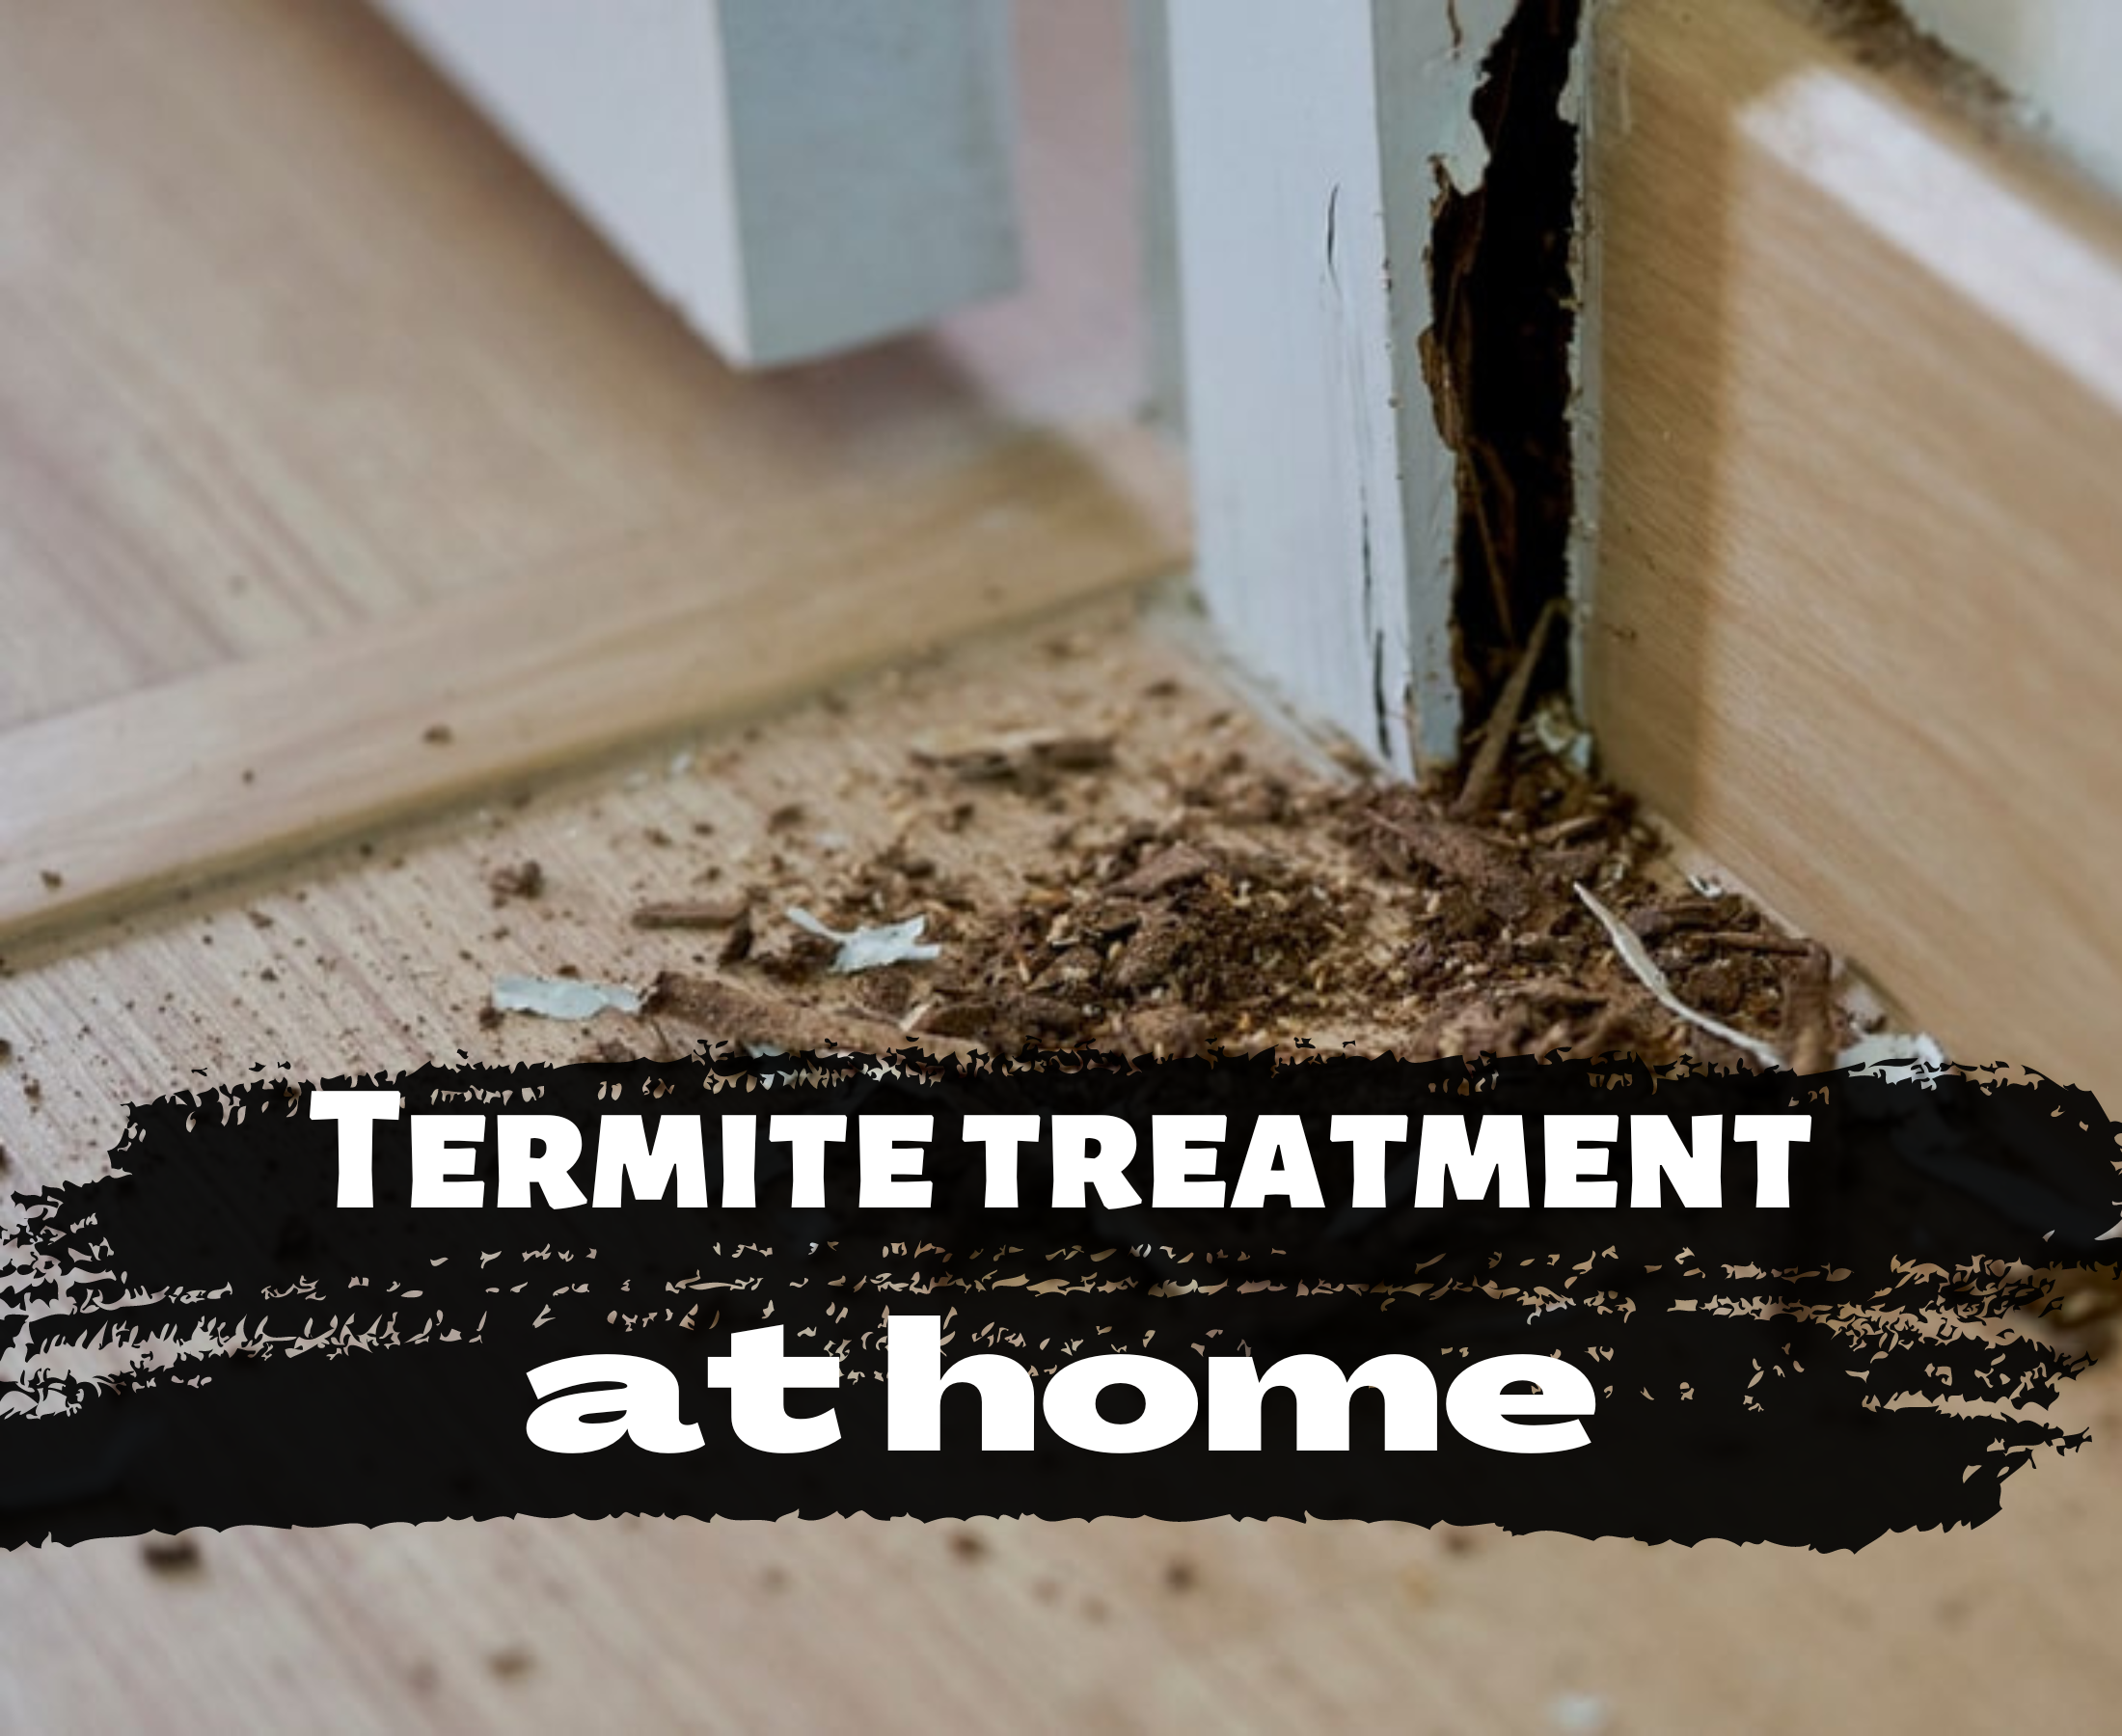 What is the best treatment for termites at home?